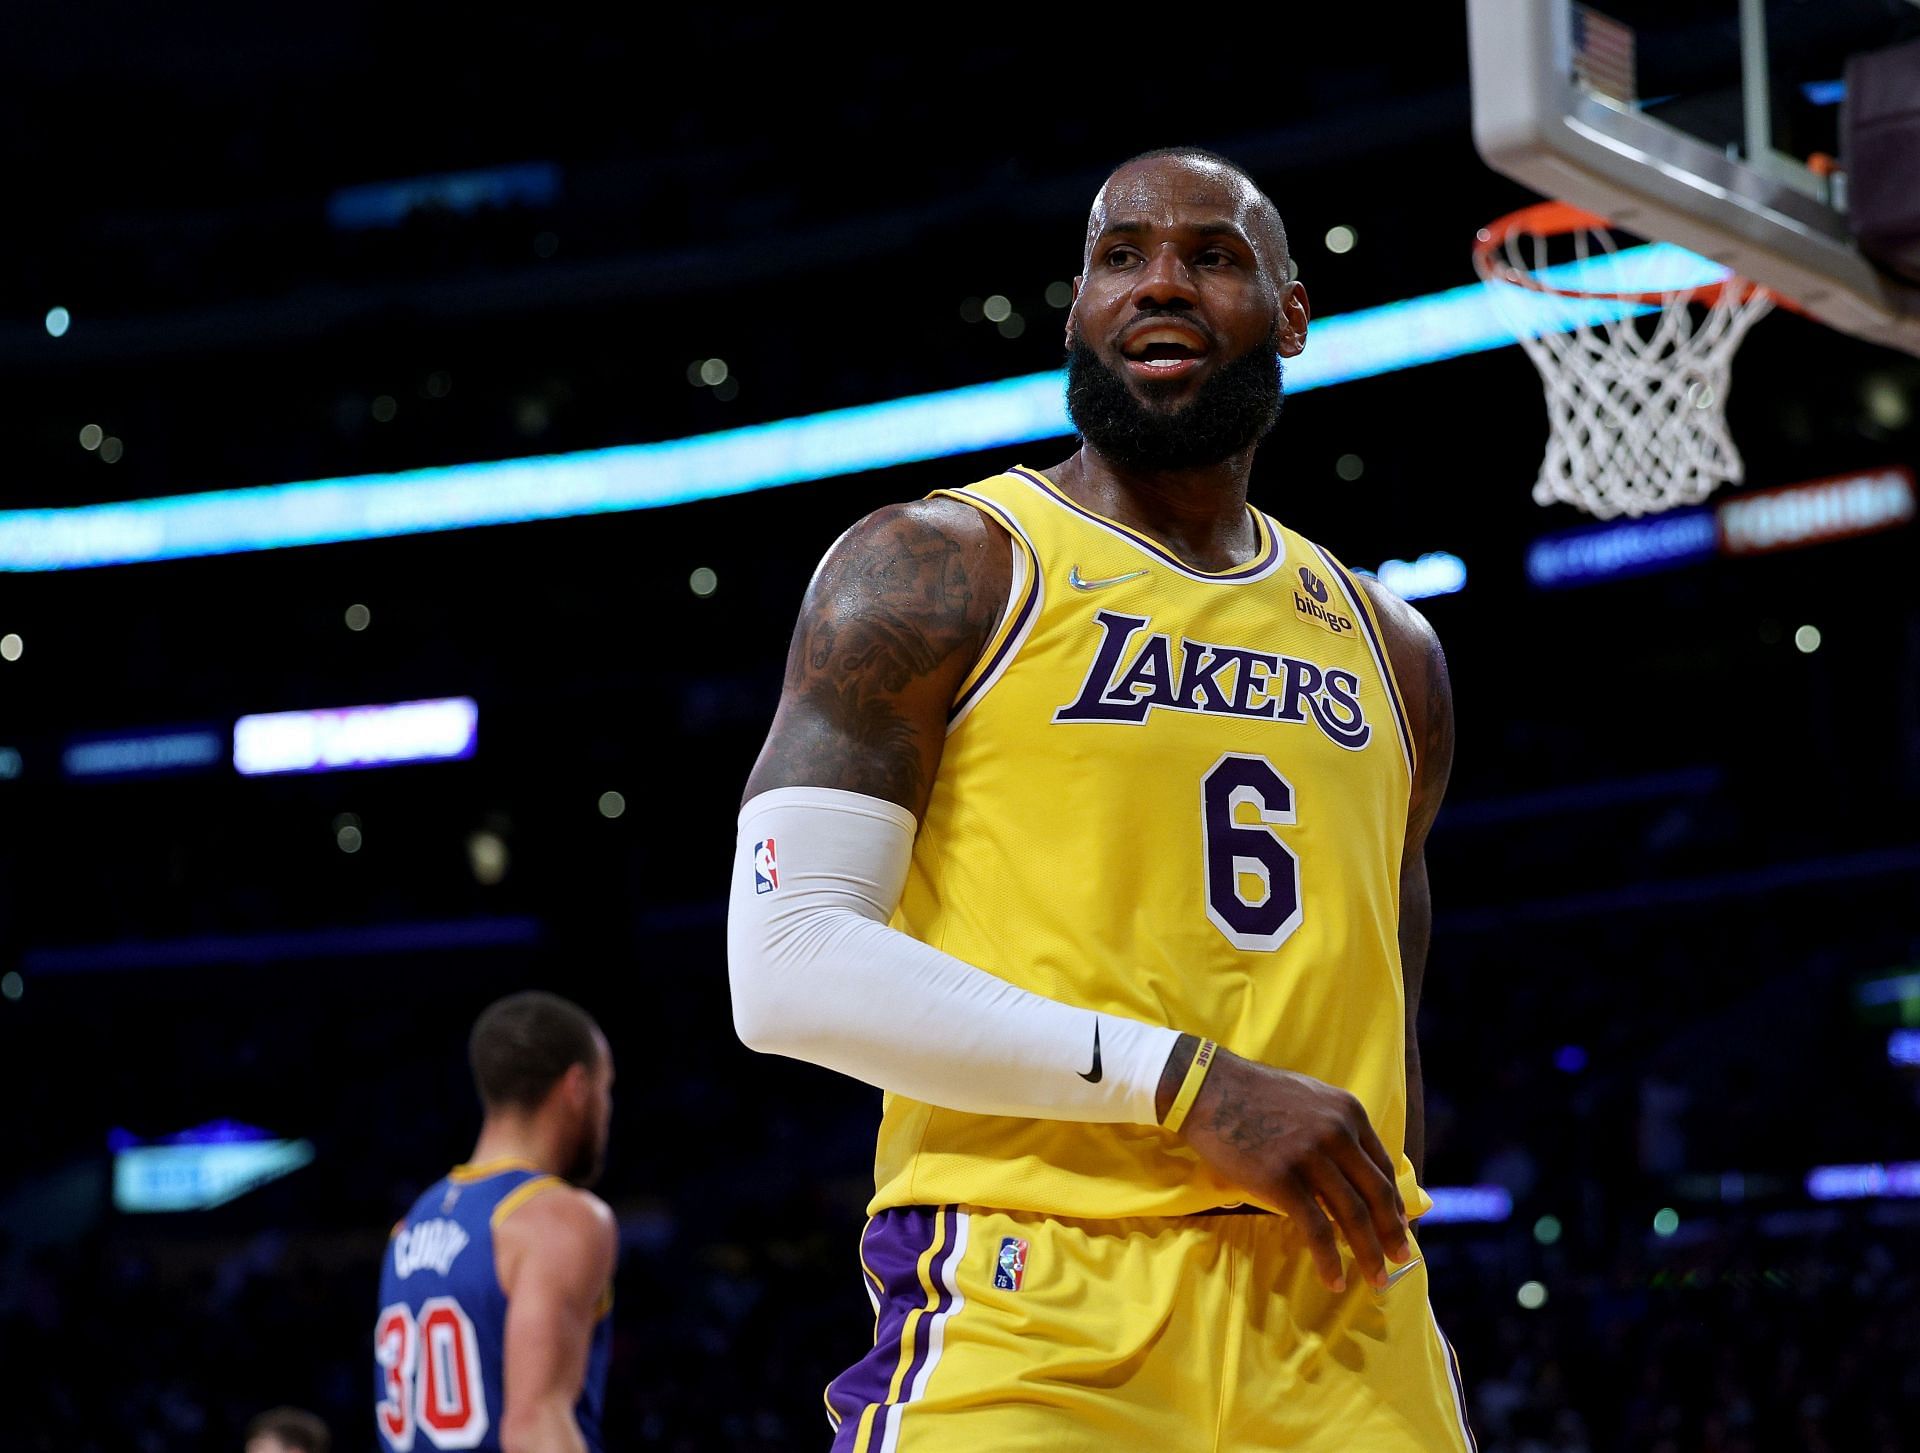 LeBron James #6 of the Los Angeles Lakers reacts after his basket and Golden State Warriors foul during a 124-116 Lakers win at Crypto.com Arena on March 05, 2022 in Los Angeles, California.